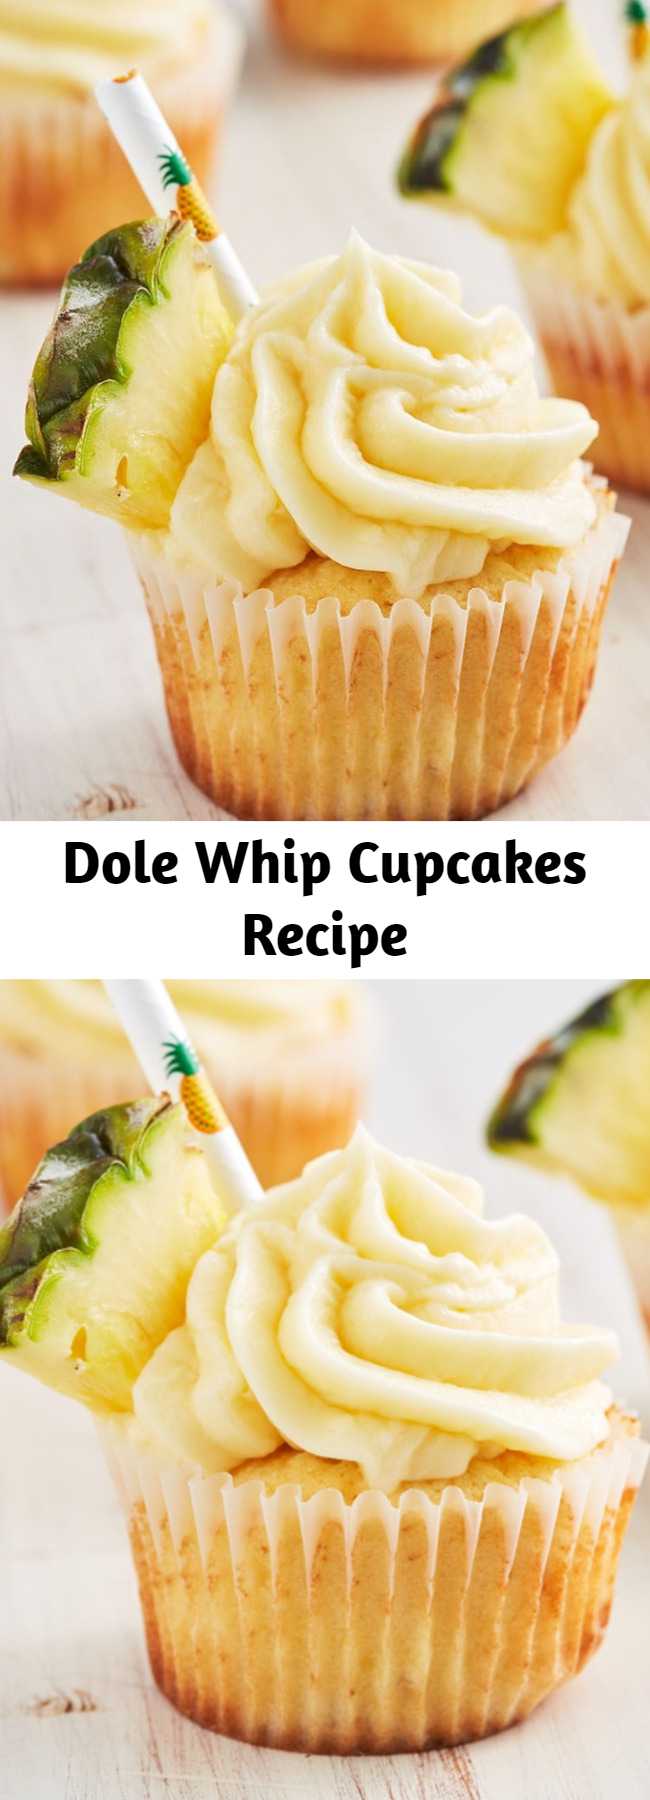 Dole Whip Cupcakes Recipe - Dole Whip has a cult following and we get it. It's the most refreshing thing after waiting in insanely long lines all day. Well now you don't have to travel to Disney for it and the cupcake version is even better.